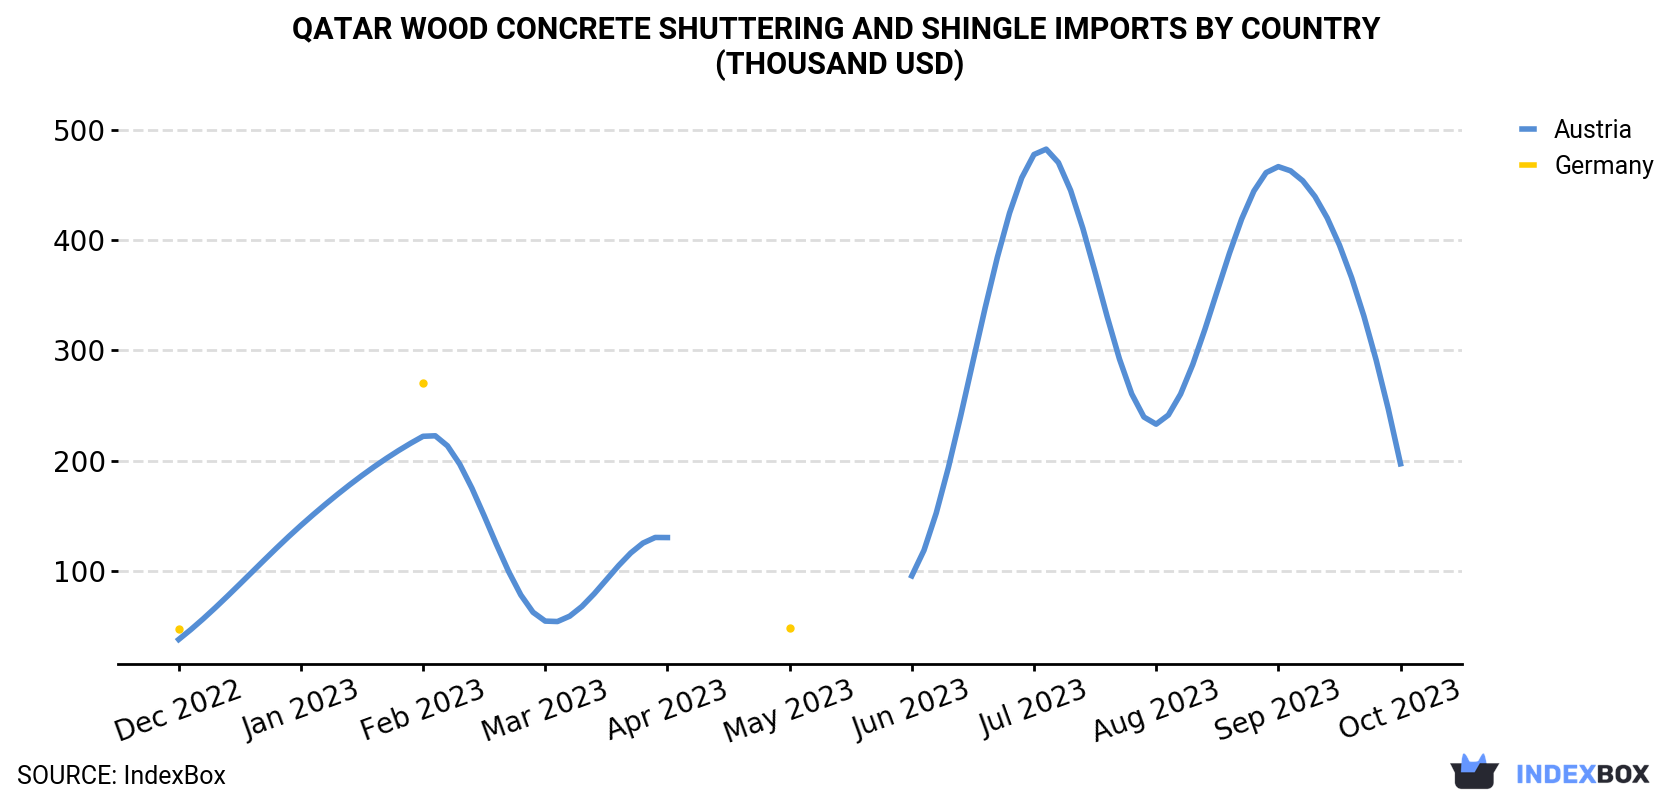 Qatar Wood Concrete Shuttering and Shingle Imports By Country (Thousand USD)